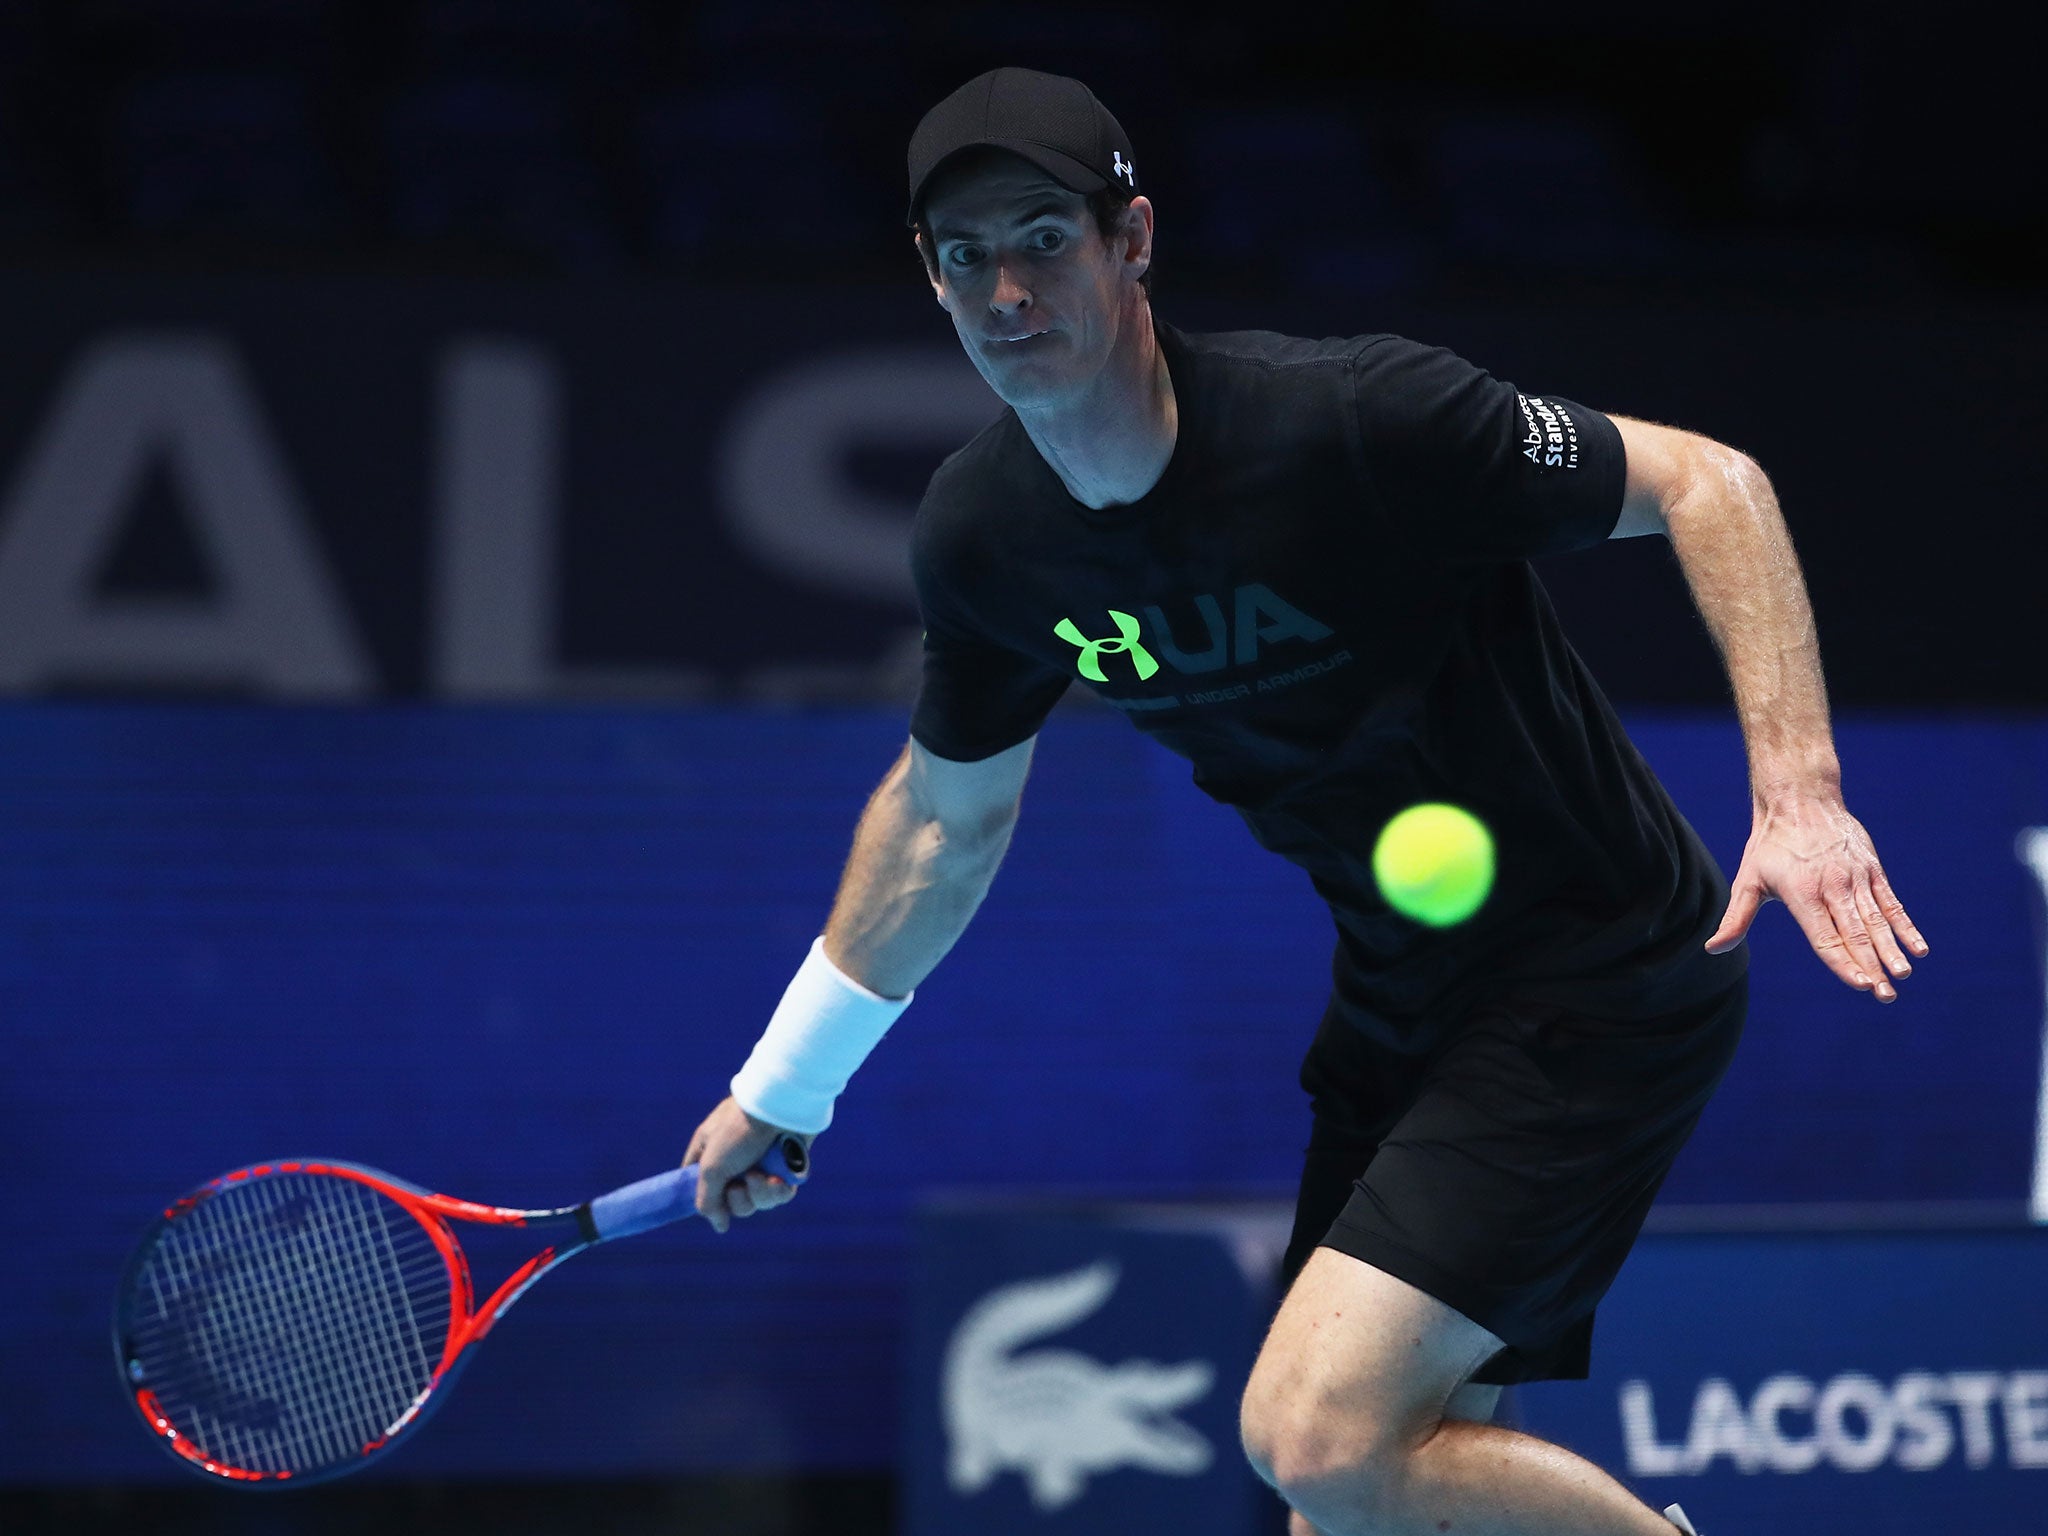 &#13;
Murray's competitive return has been pushed back due to his ongoing injury concerns &#13;